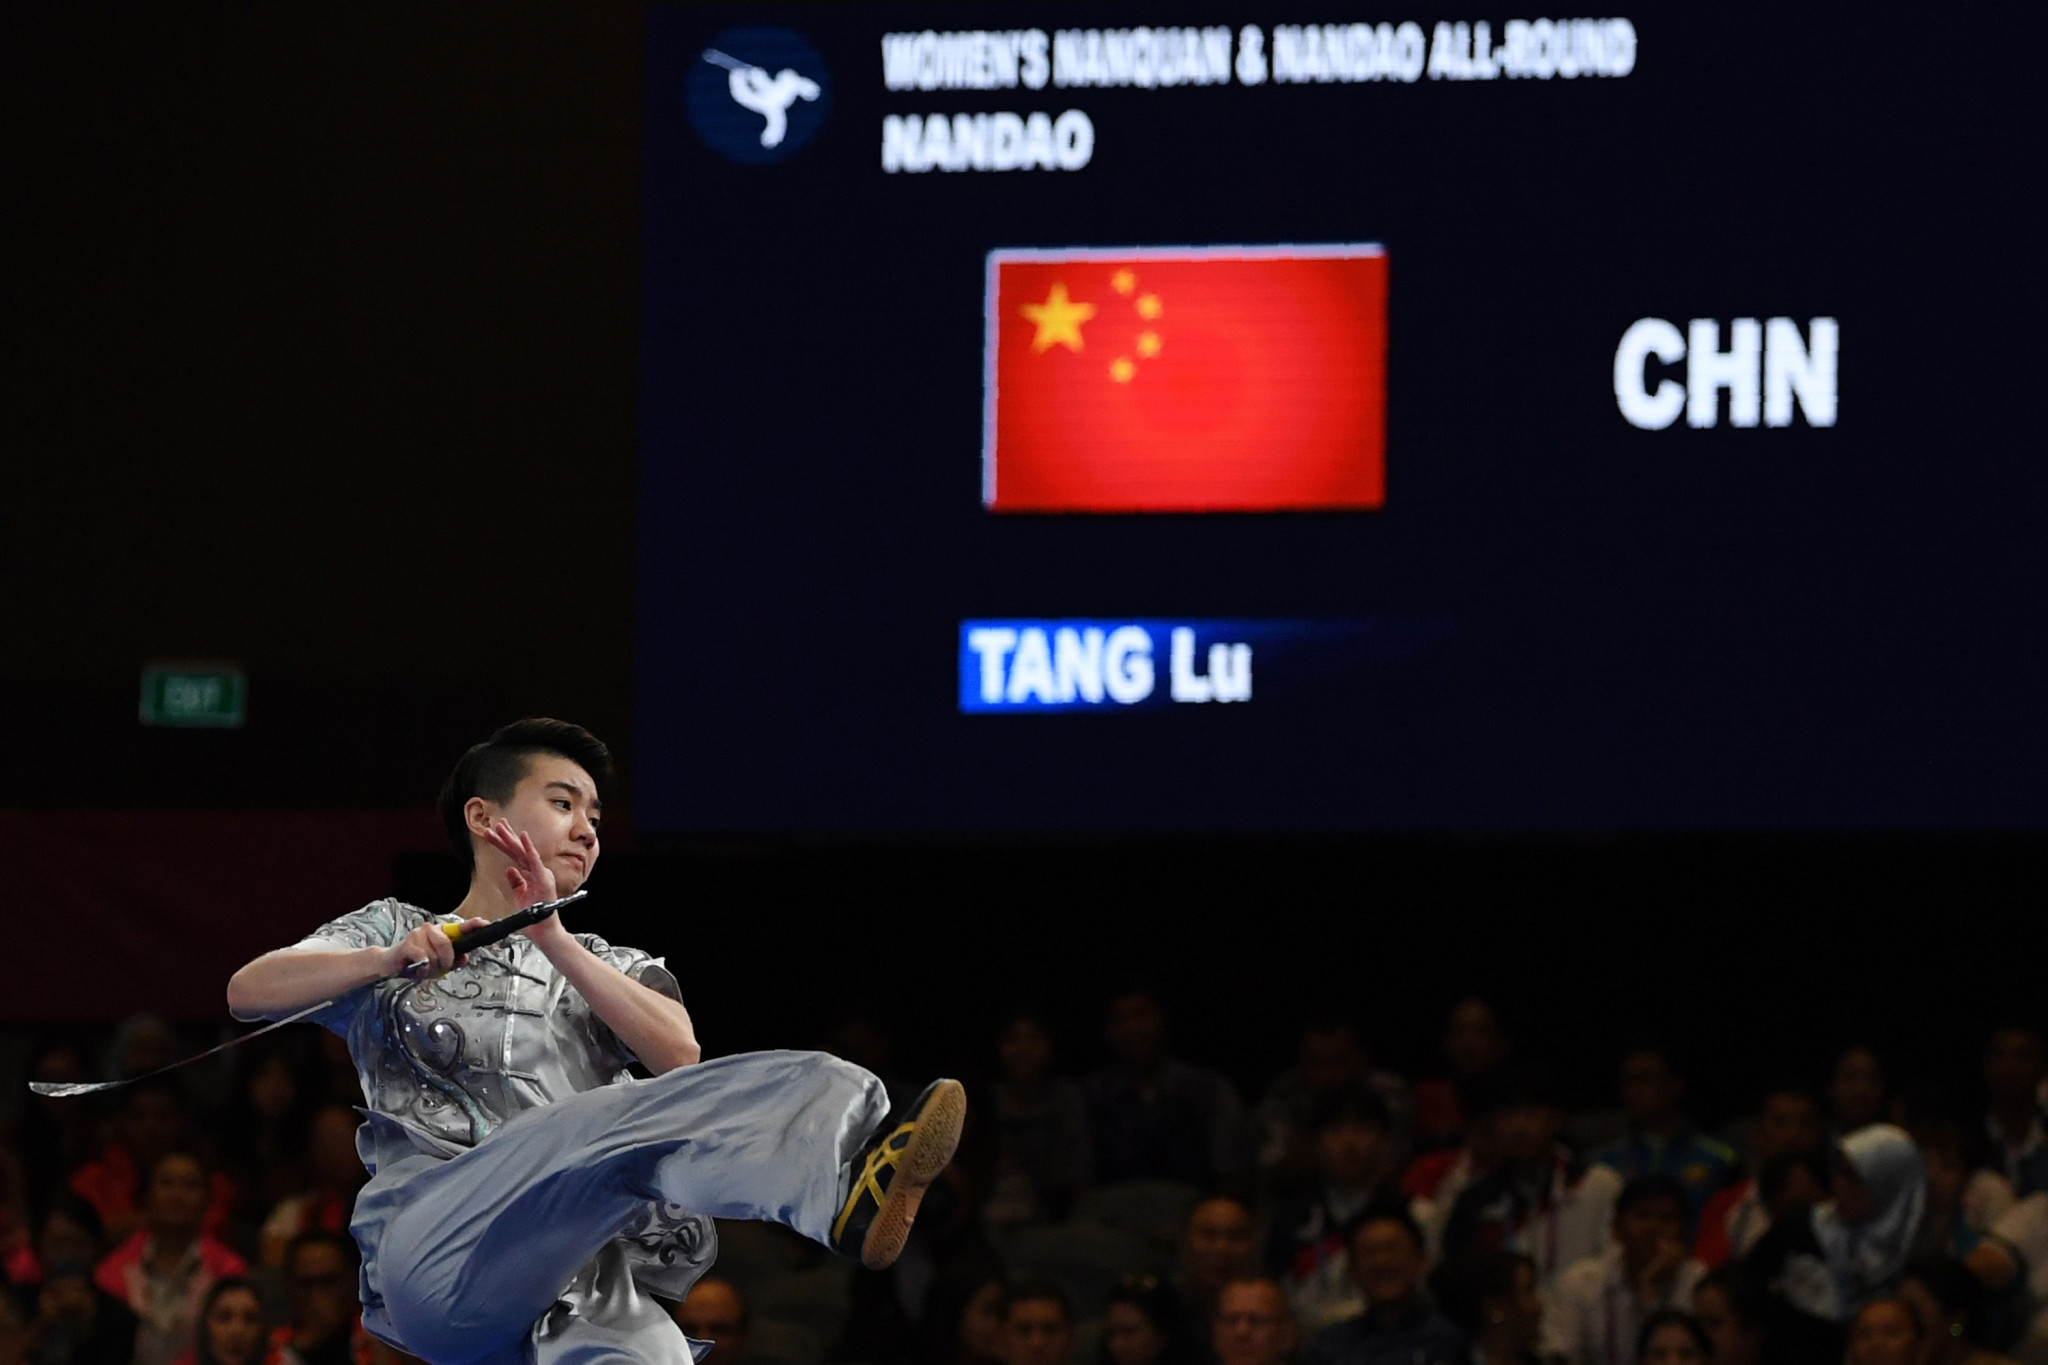 China's Lu Tang wrapped up victory in the women's nanquan and nandao all-around wushu event ©Getty Images